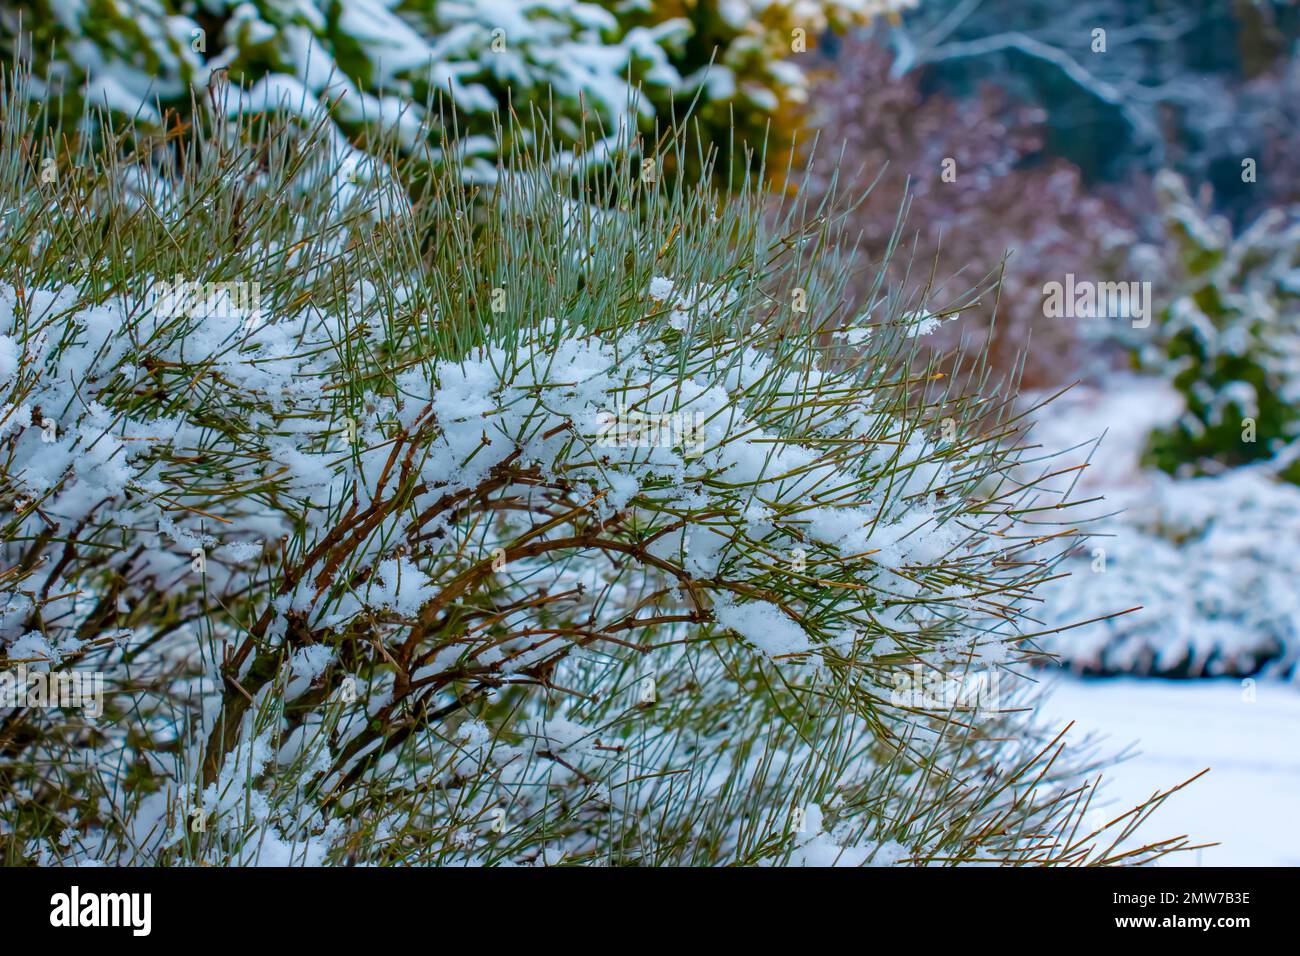 Ephedra distachya growing in the garden during the winter season. The branches of the plant are covered with snow. Stock Photo